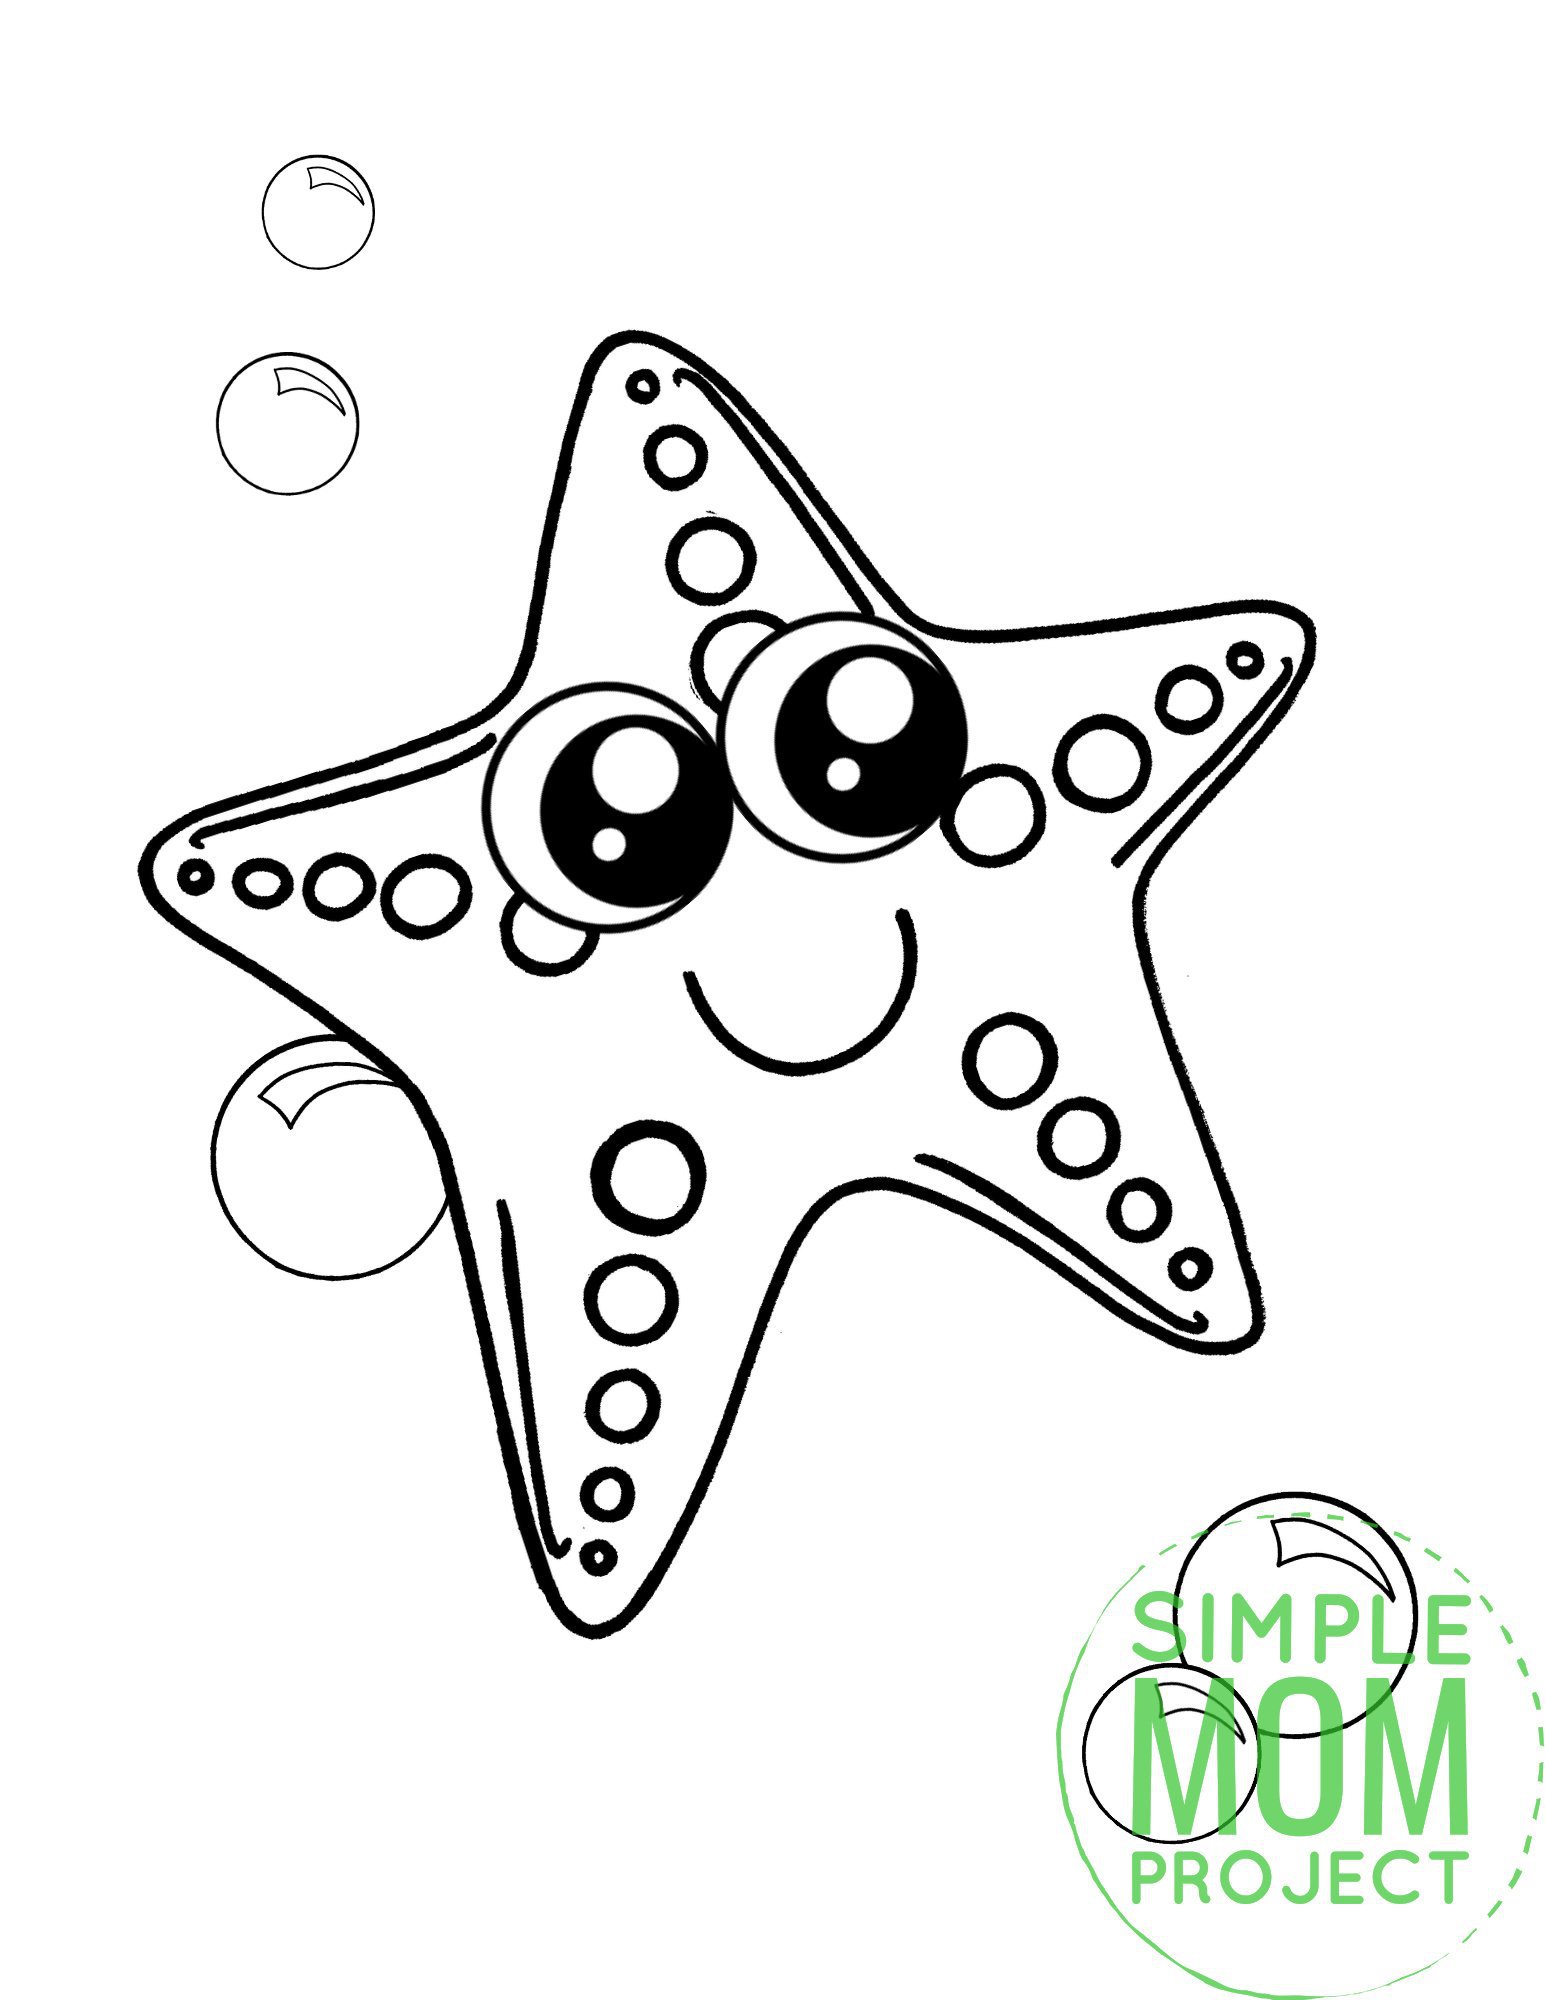 Free Printable Starfish Coloring Page - Simple Mom Project